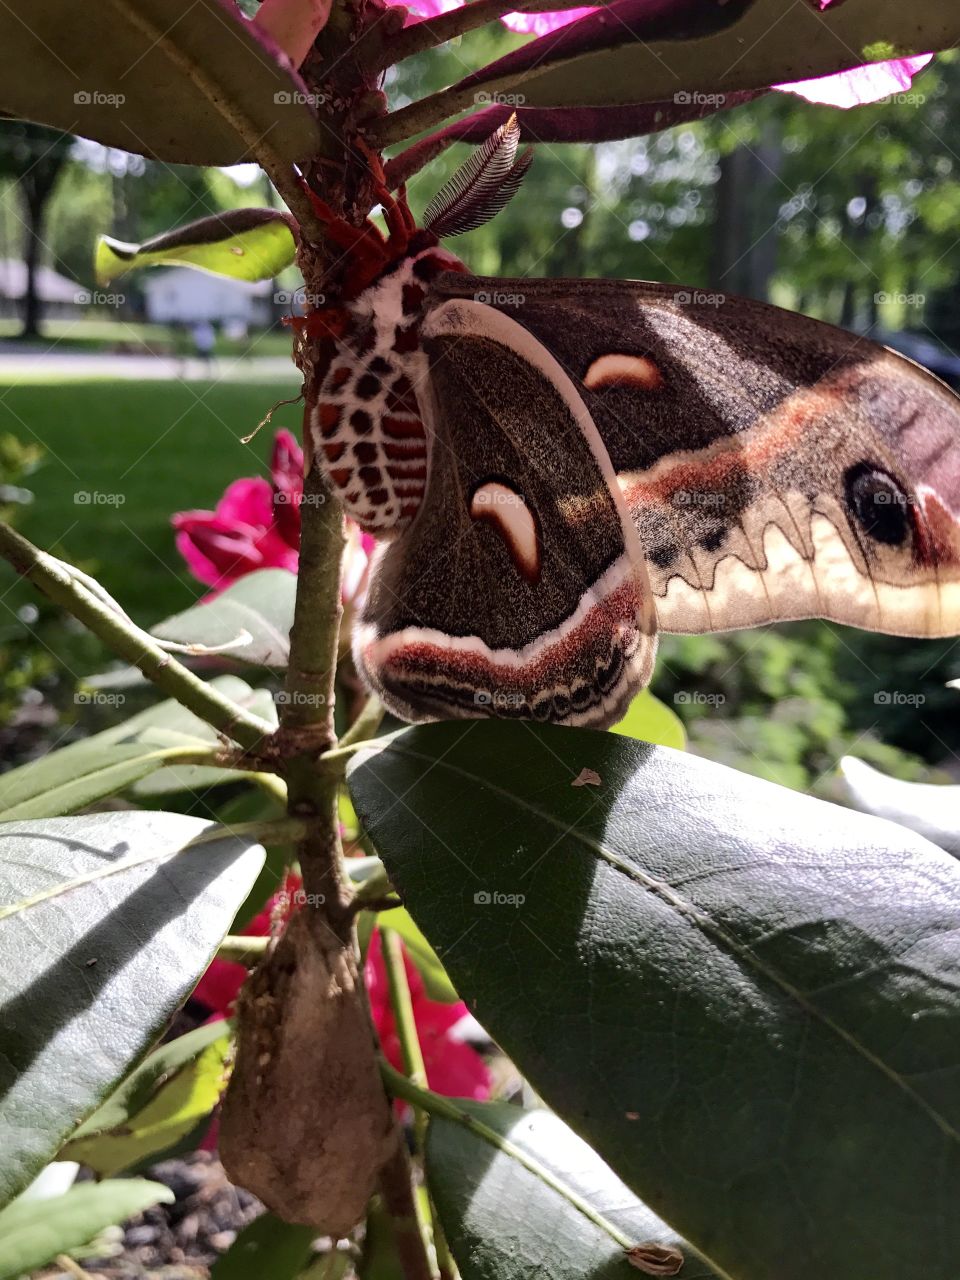 Moon moth and cocoon with sun shining bright on wings